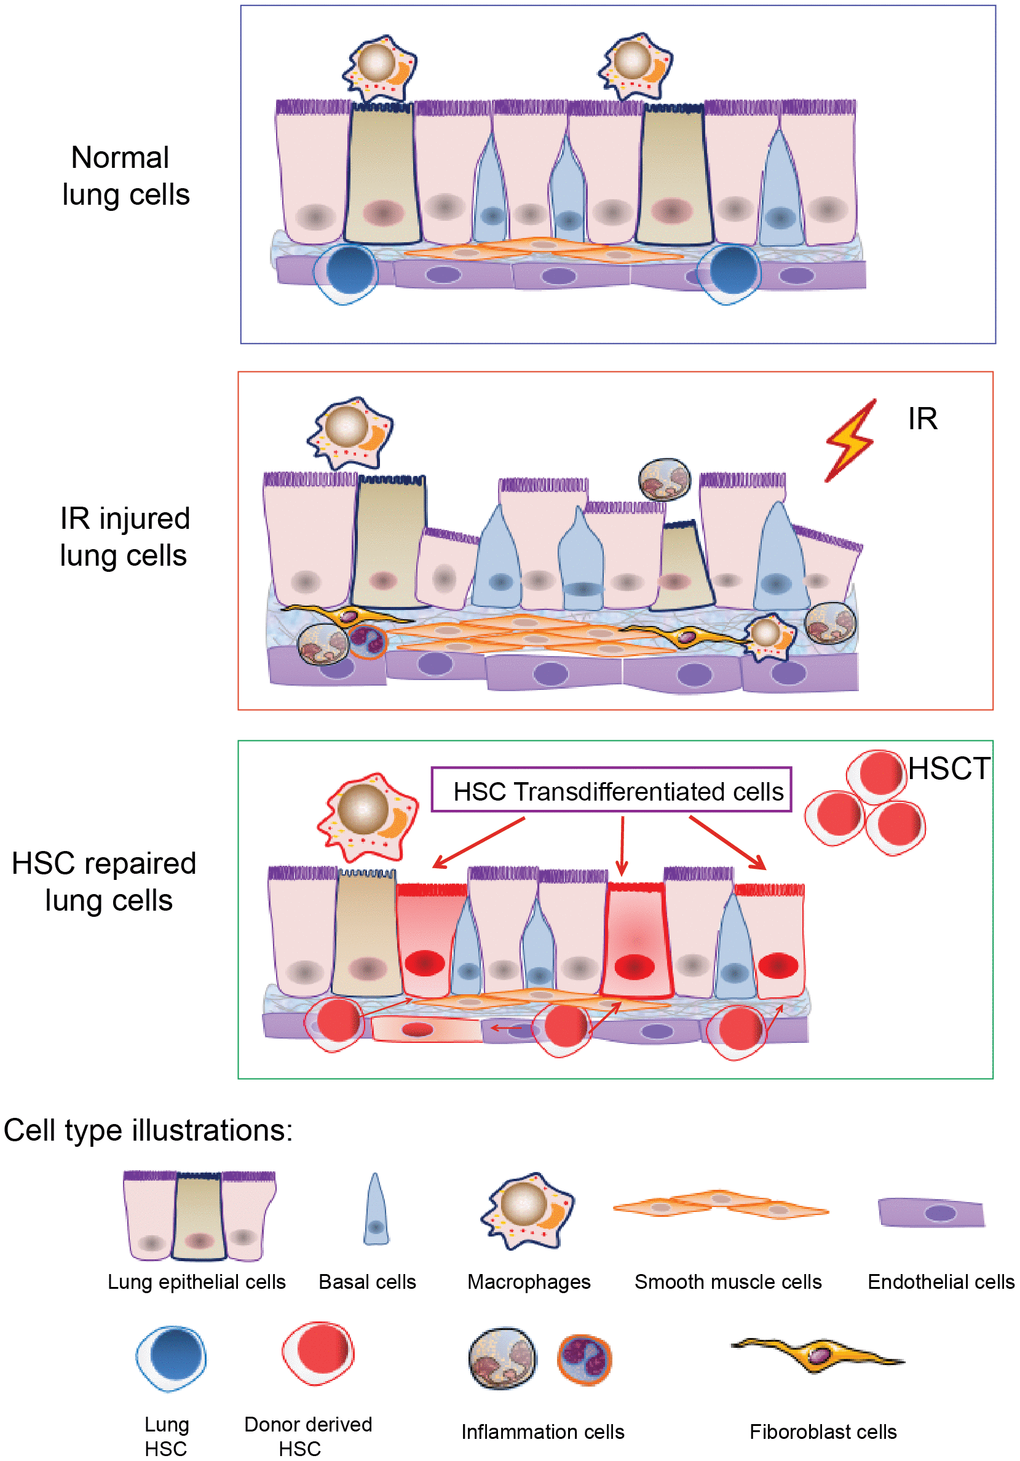 A cartoon illustrating HSCs transdifferentiation to pneumonocytes for irradiated lung repair. The cartoon illustrates HSCs transdifferentiate into the lung cells under certain injury such as irradiation. Irradiation induced lung bronchial epithelial cell structure destruction, inflammatory cell infiltration and fibrous hyperplasia and impaired HSC residency in the lung. After HSCT, donor HSCs migrate into the injured lung, and some of them can be transdifferentiated to lung epithelial and endothelial cells to repair the injury imposed by irradiation.